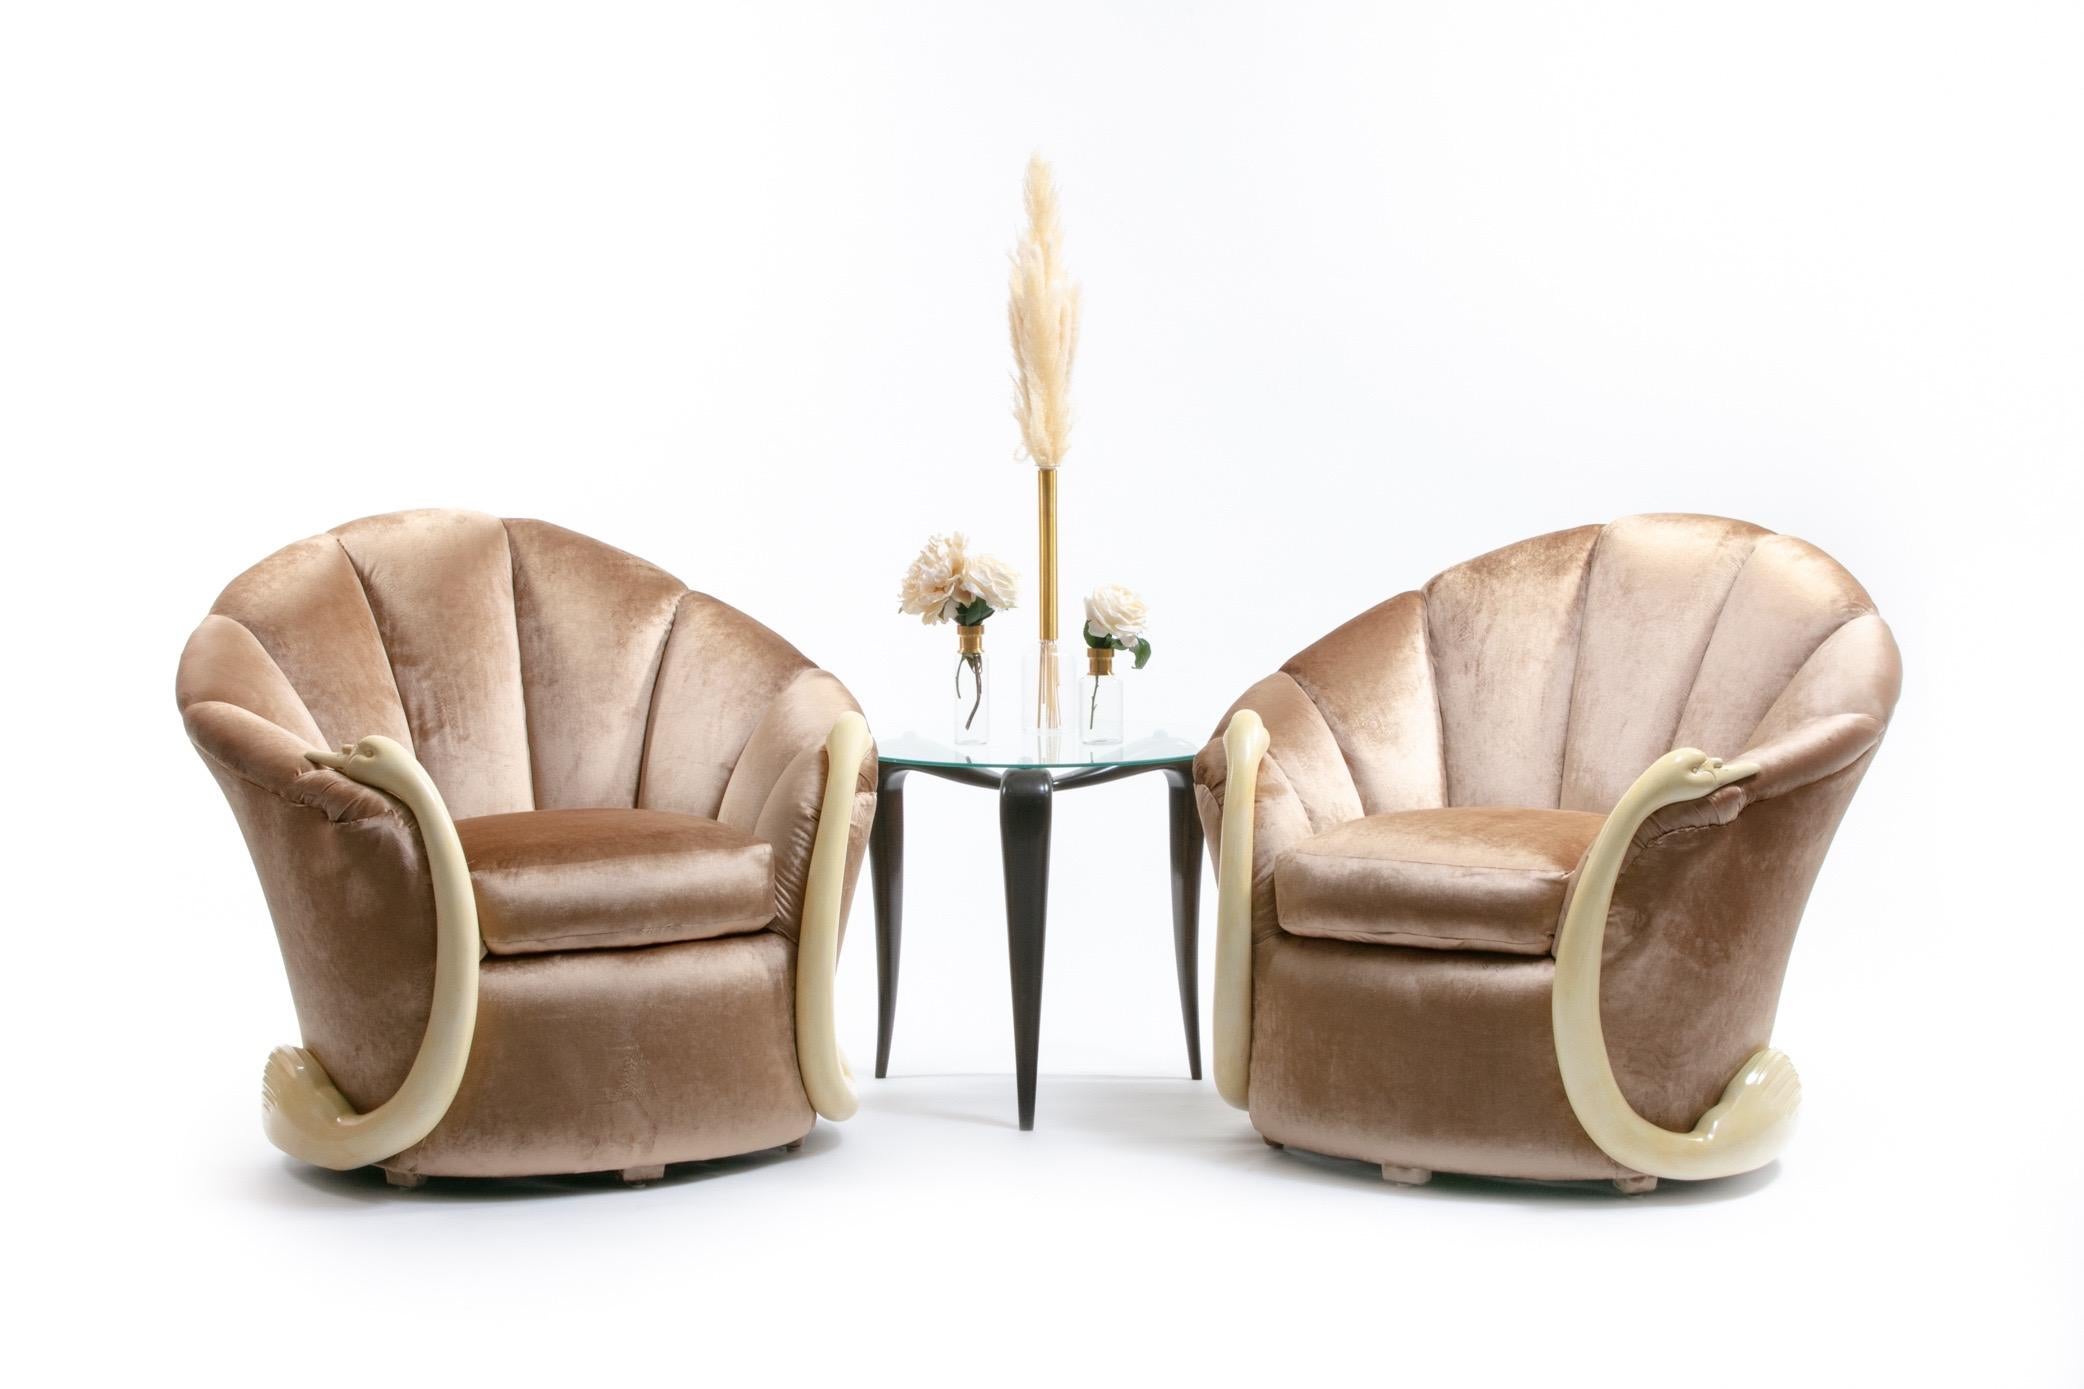 Lacquered Suzanne Geismar Swan Leda Lounge Chairs in Mink Velvet and Ivory Parchment Swans For Sale